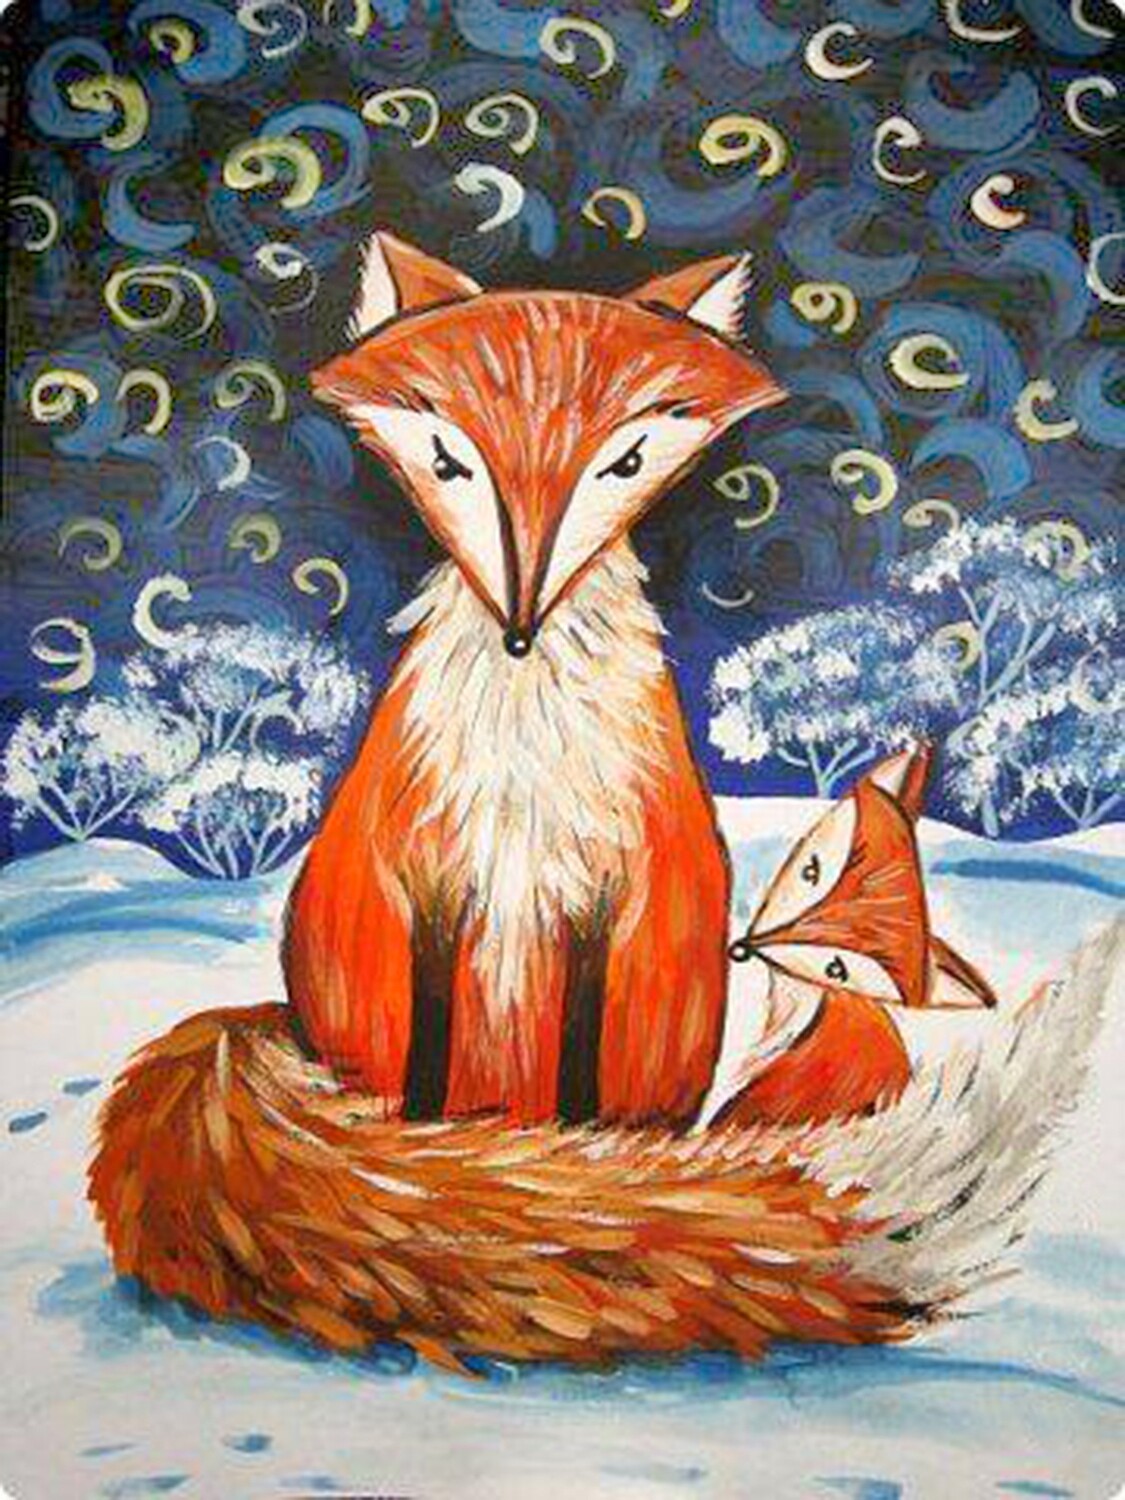 Winter foxes in snow